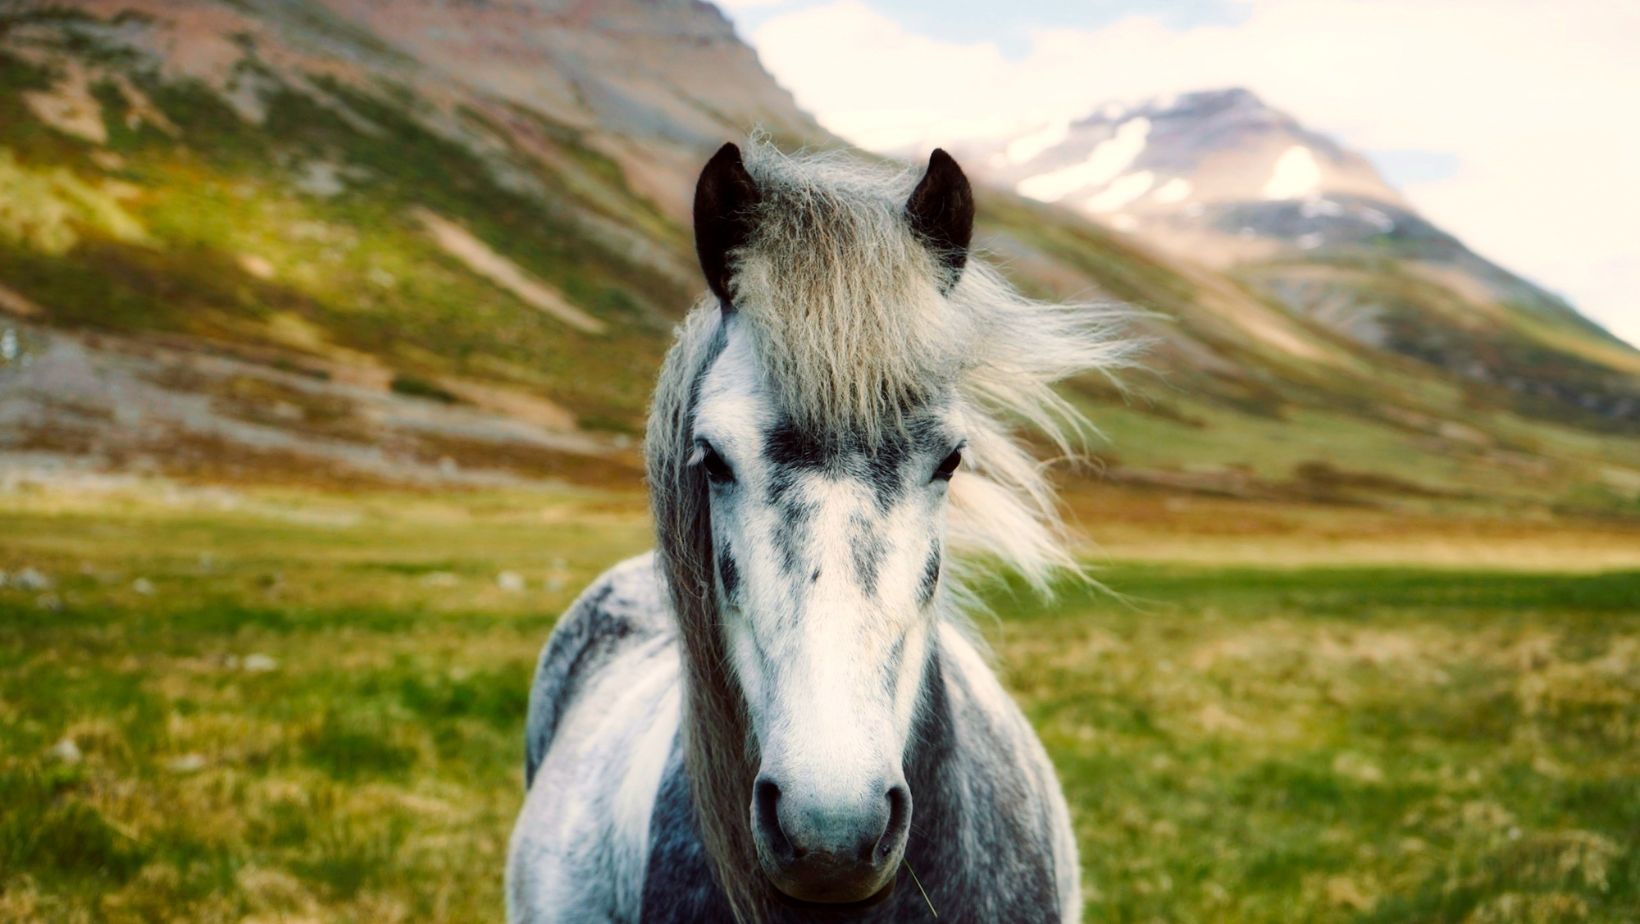 Grey and white Icelandic horse with a green mountain in the landscape behind.